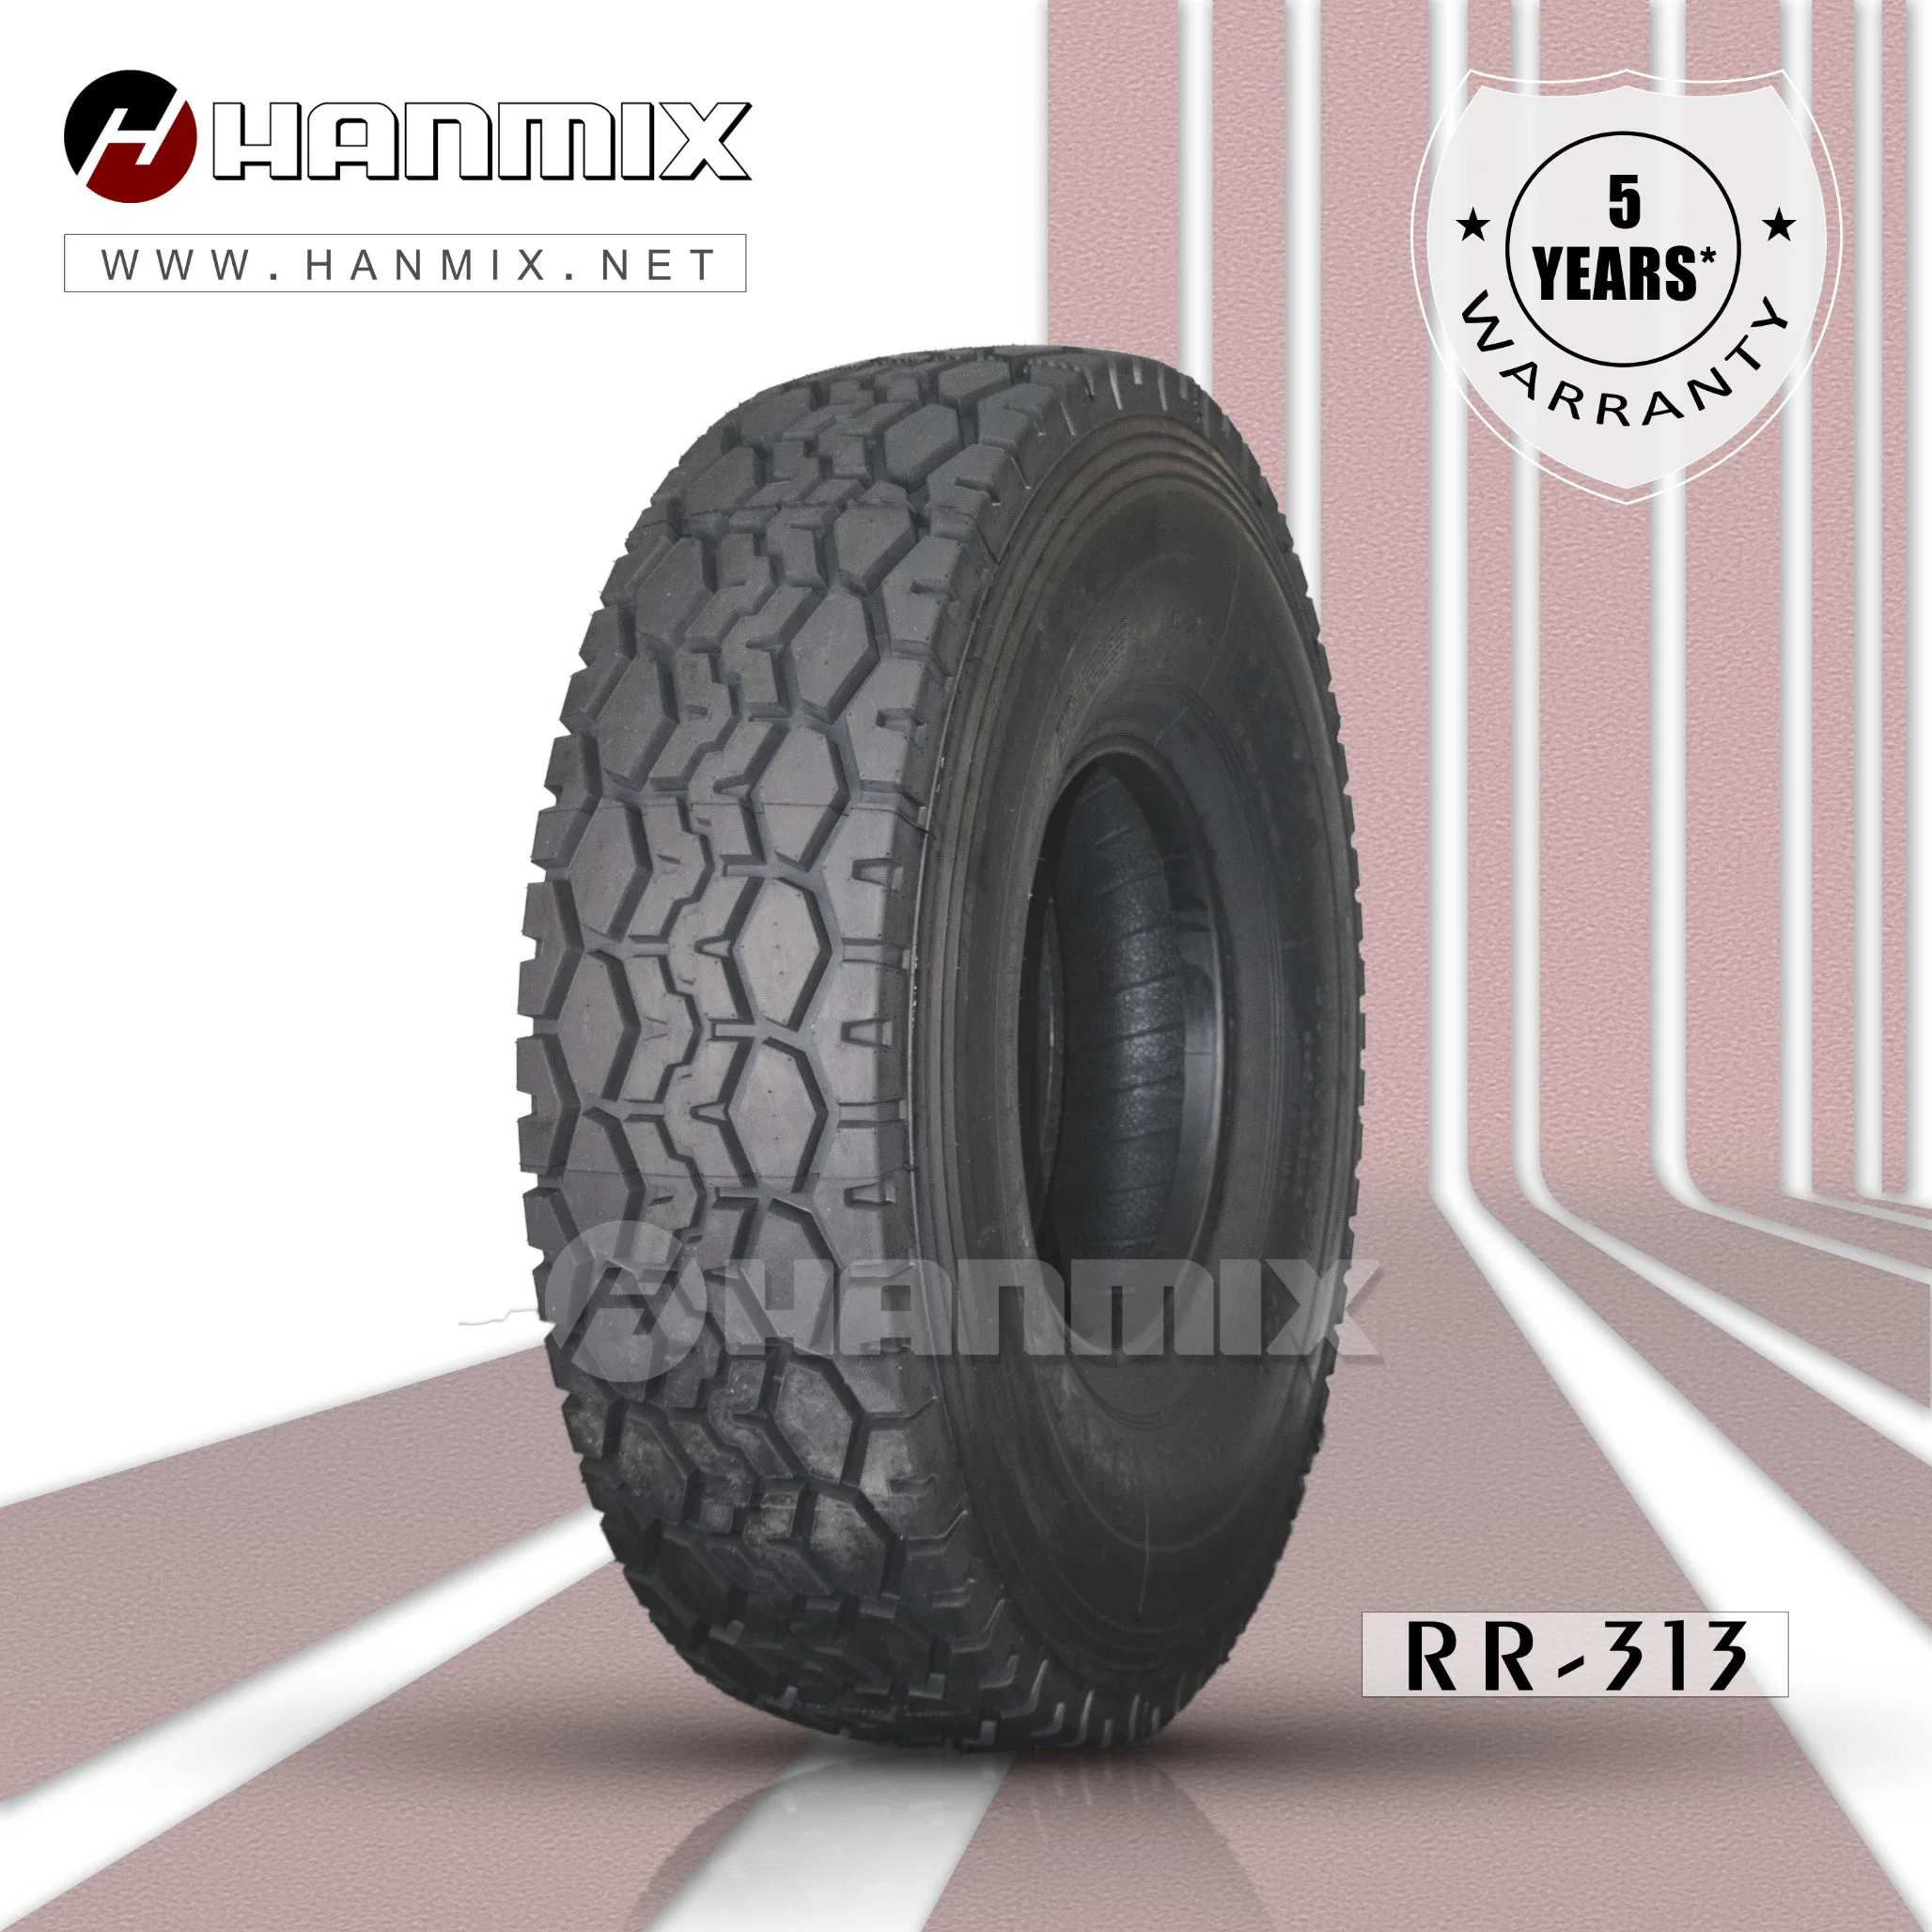 Hanmix off-The-Road Radial Tire Agriculture Ind Cranes, Fire Rescue E2/L2 E3/L3 E4/L4 16.00r25 (445/95R25) OTR Radial Tyre OTR Tire